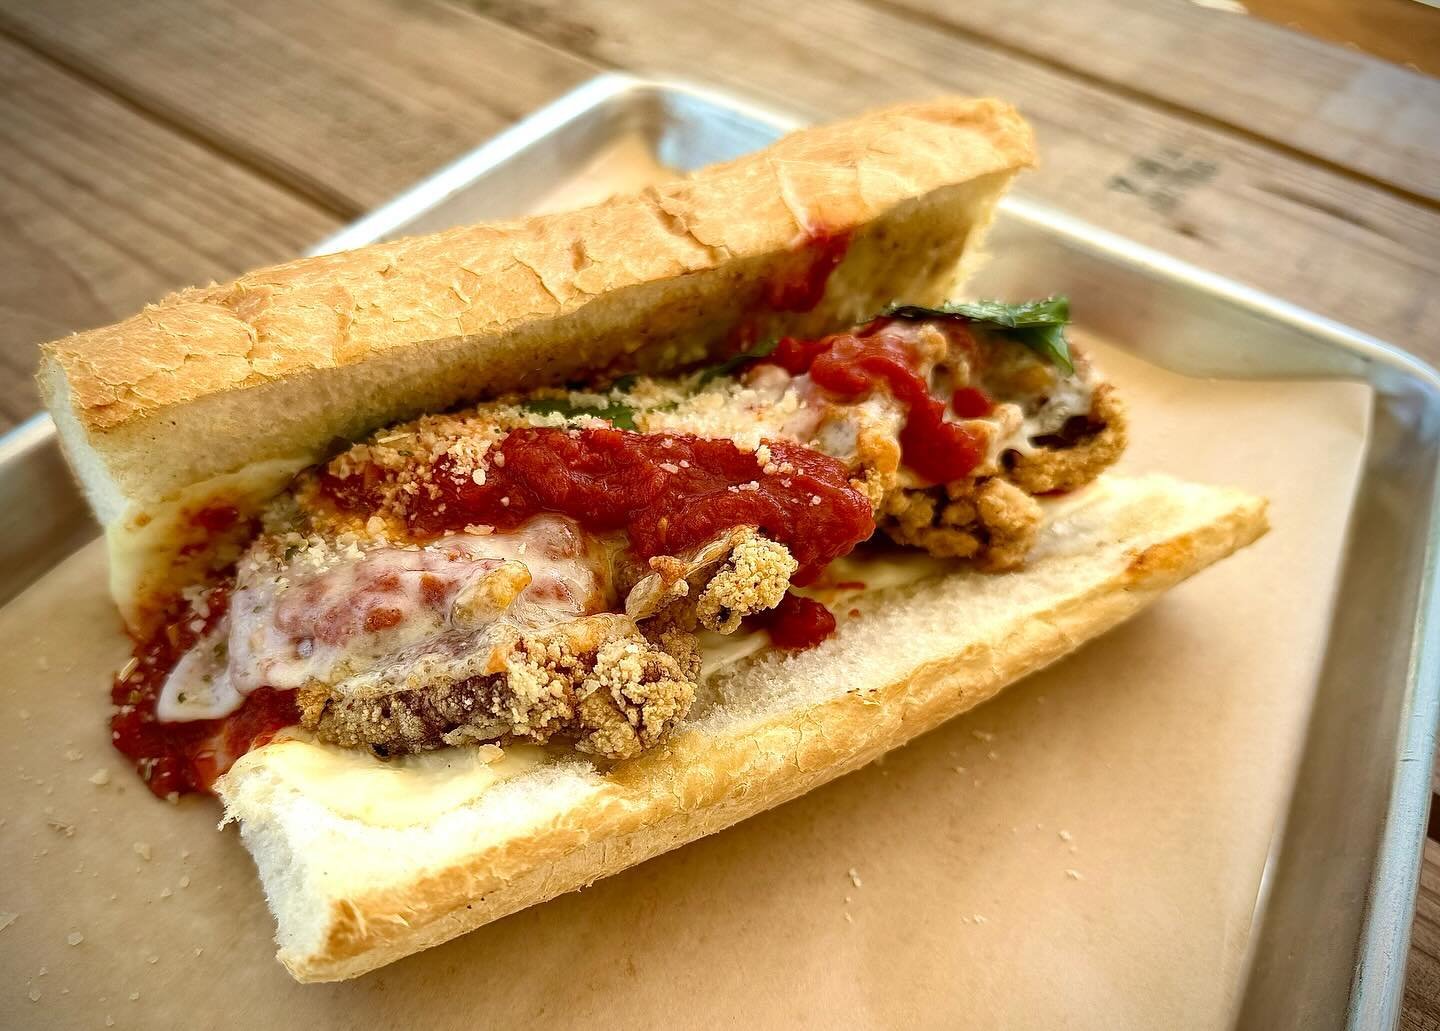 Chicken Parm Sandwich Thursdays!&hellip;Are a thing now. Polenta crusted fried chicken, red sauce, mozzarella &amp; parmesan. Every Thursday till we run out. 

#chickenparm #sandwich #thursday #polenta #itisspecial #oakcliff #dallas